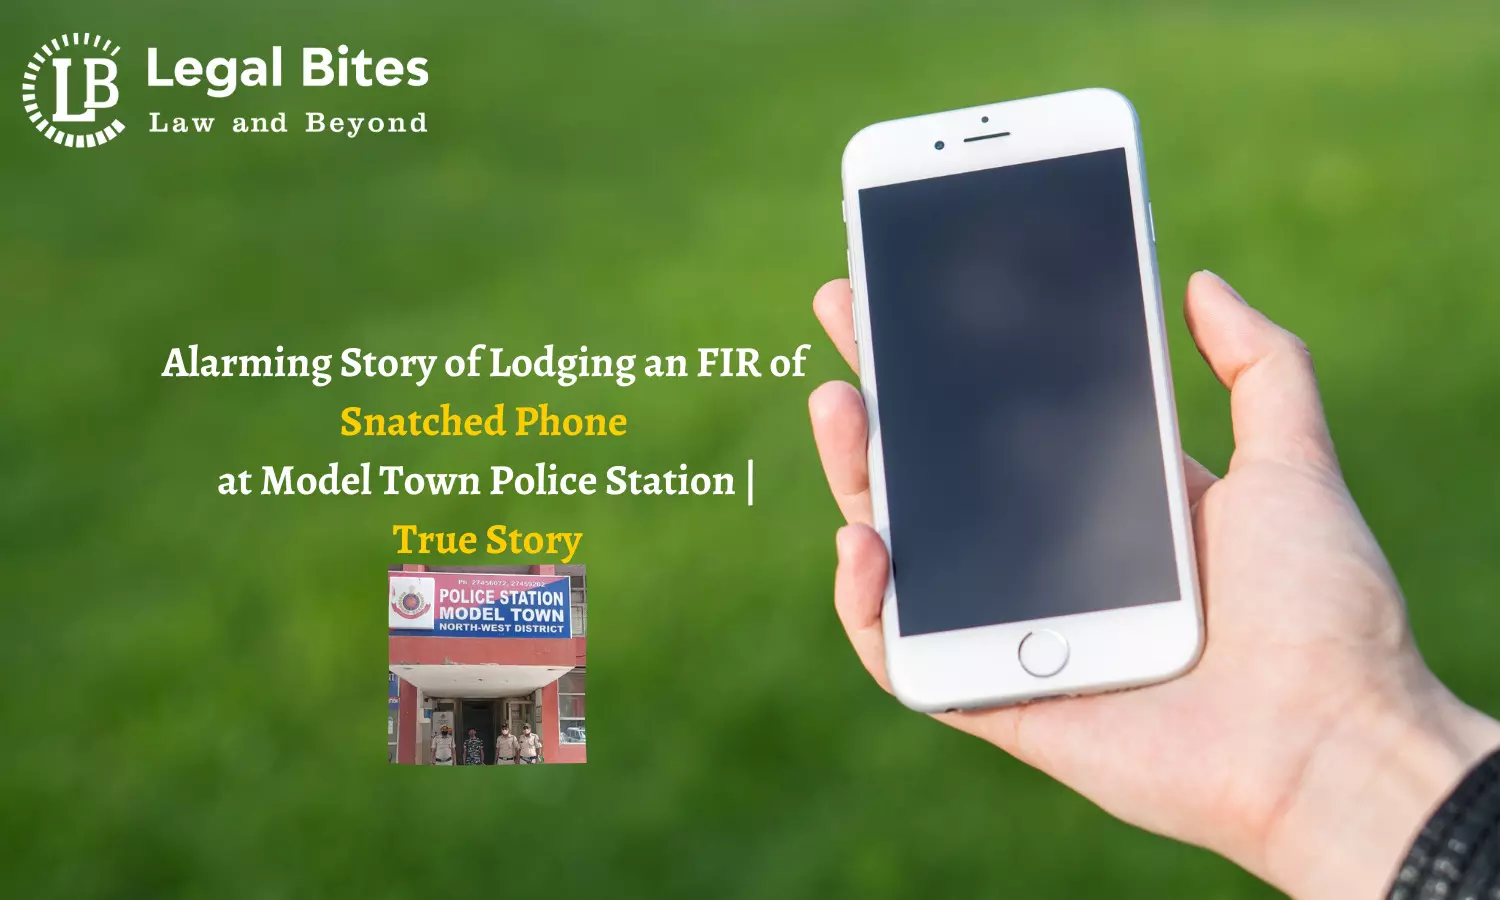 Alarming Story of Lodging an FIR of Snatched Phone at Model Town Police Station | True Story